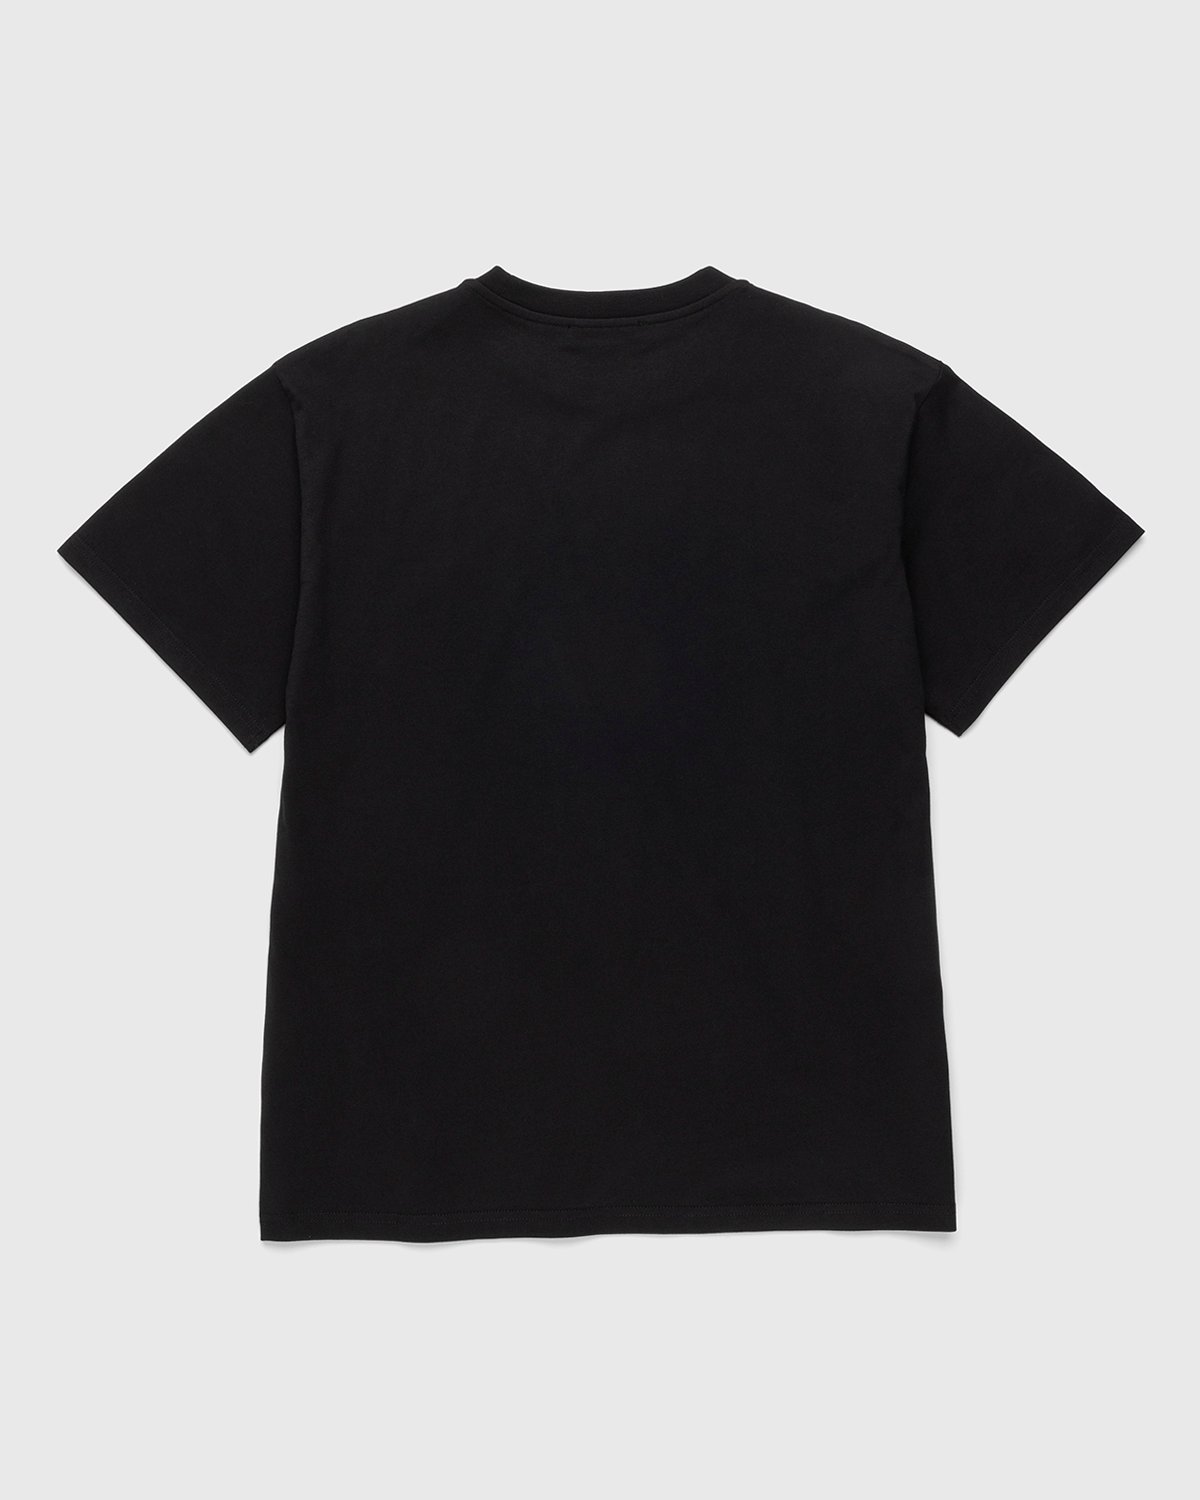 J.W. Anderson - Anchor Patch T-Shirt Black - Clothing - Black - Image 2